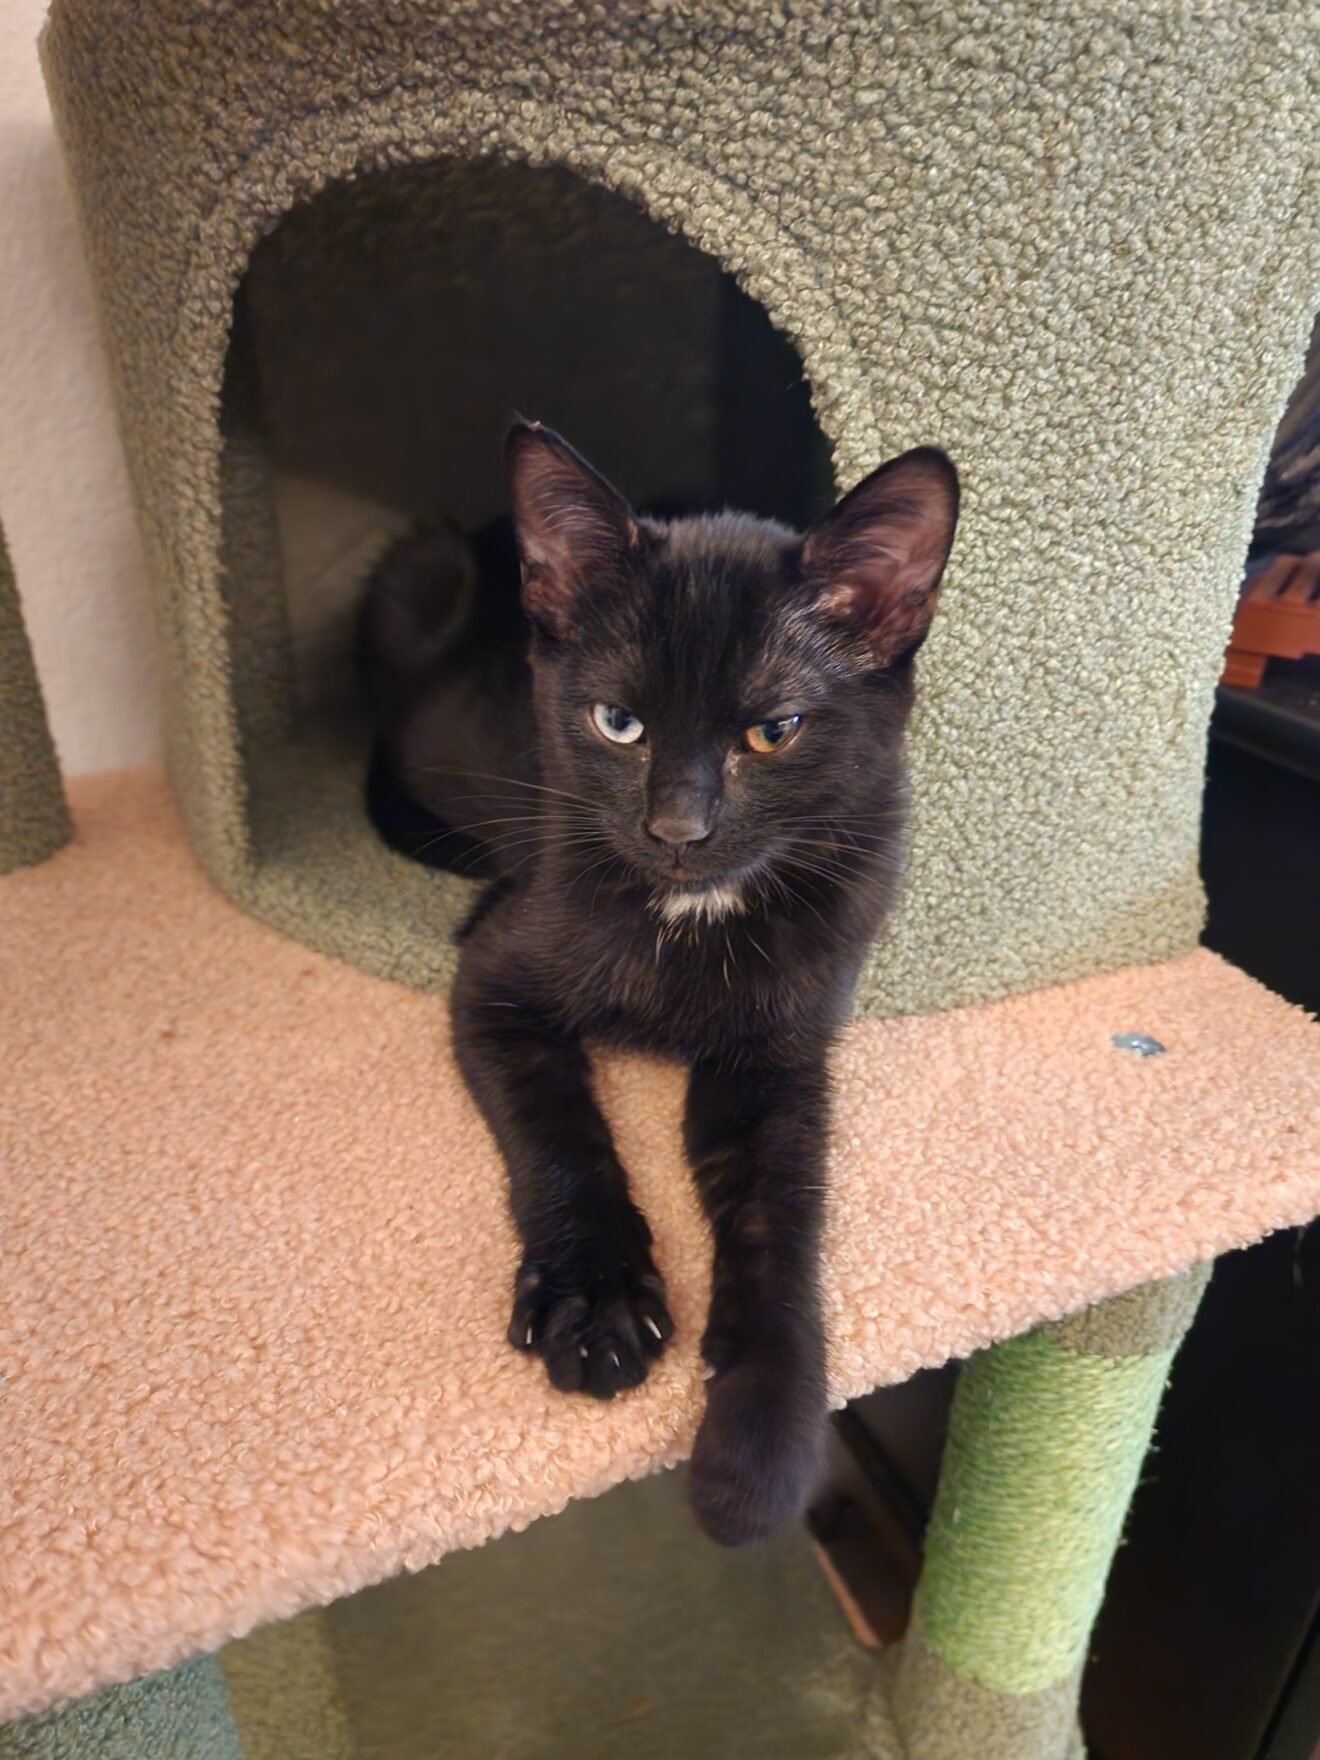 A black kitten with one blue and one hazel eye sitting in a cat tree.